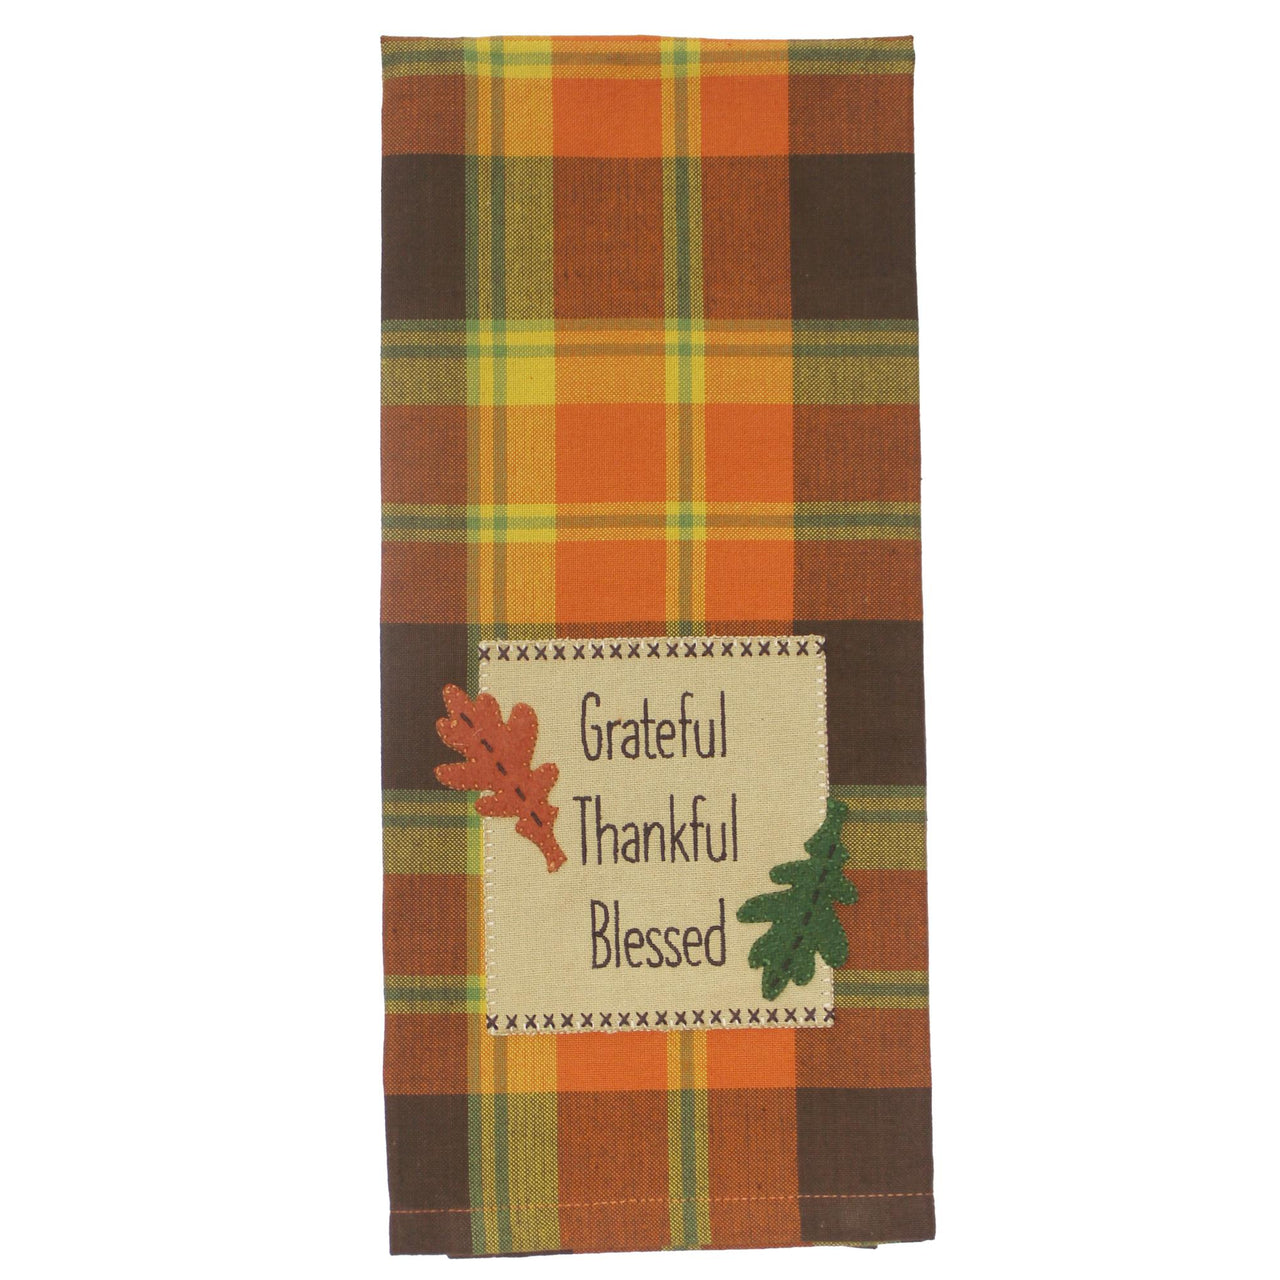 F Grateful Thankful Blessed Towel - Interiors by Elizabeth